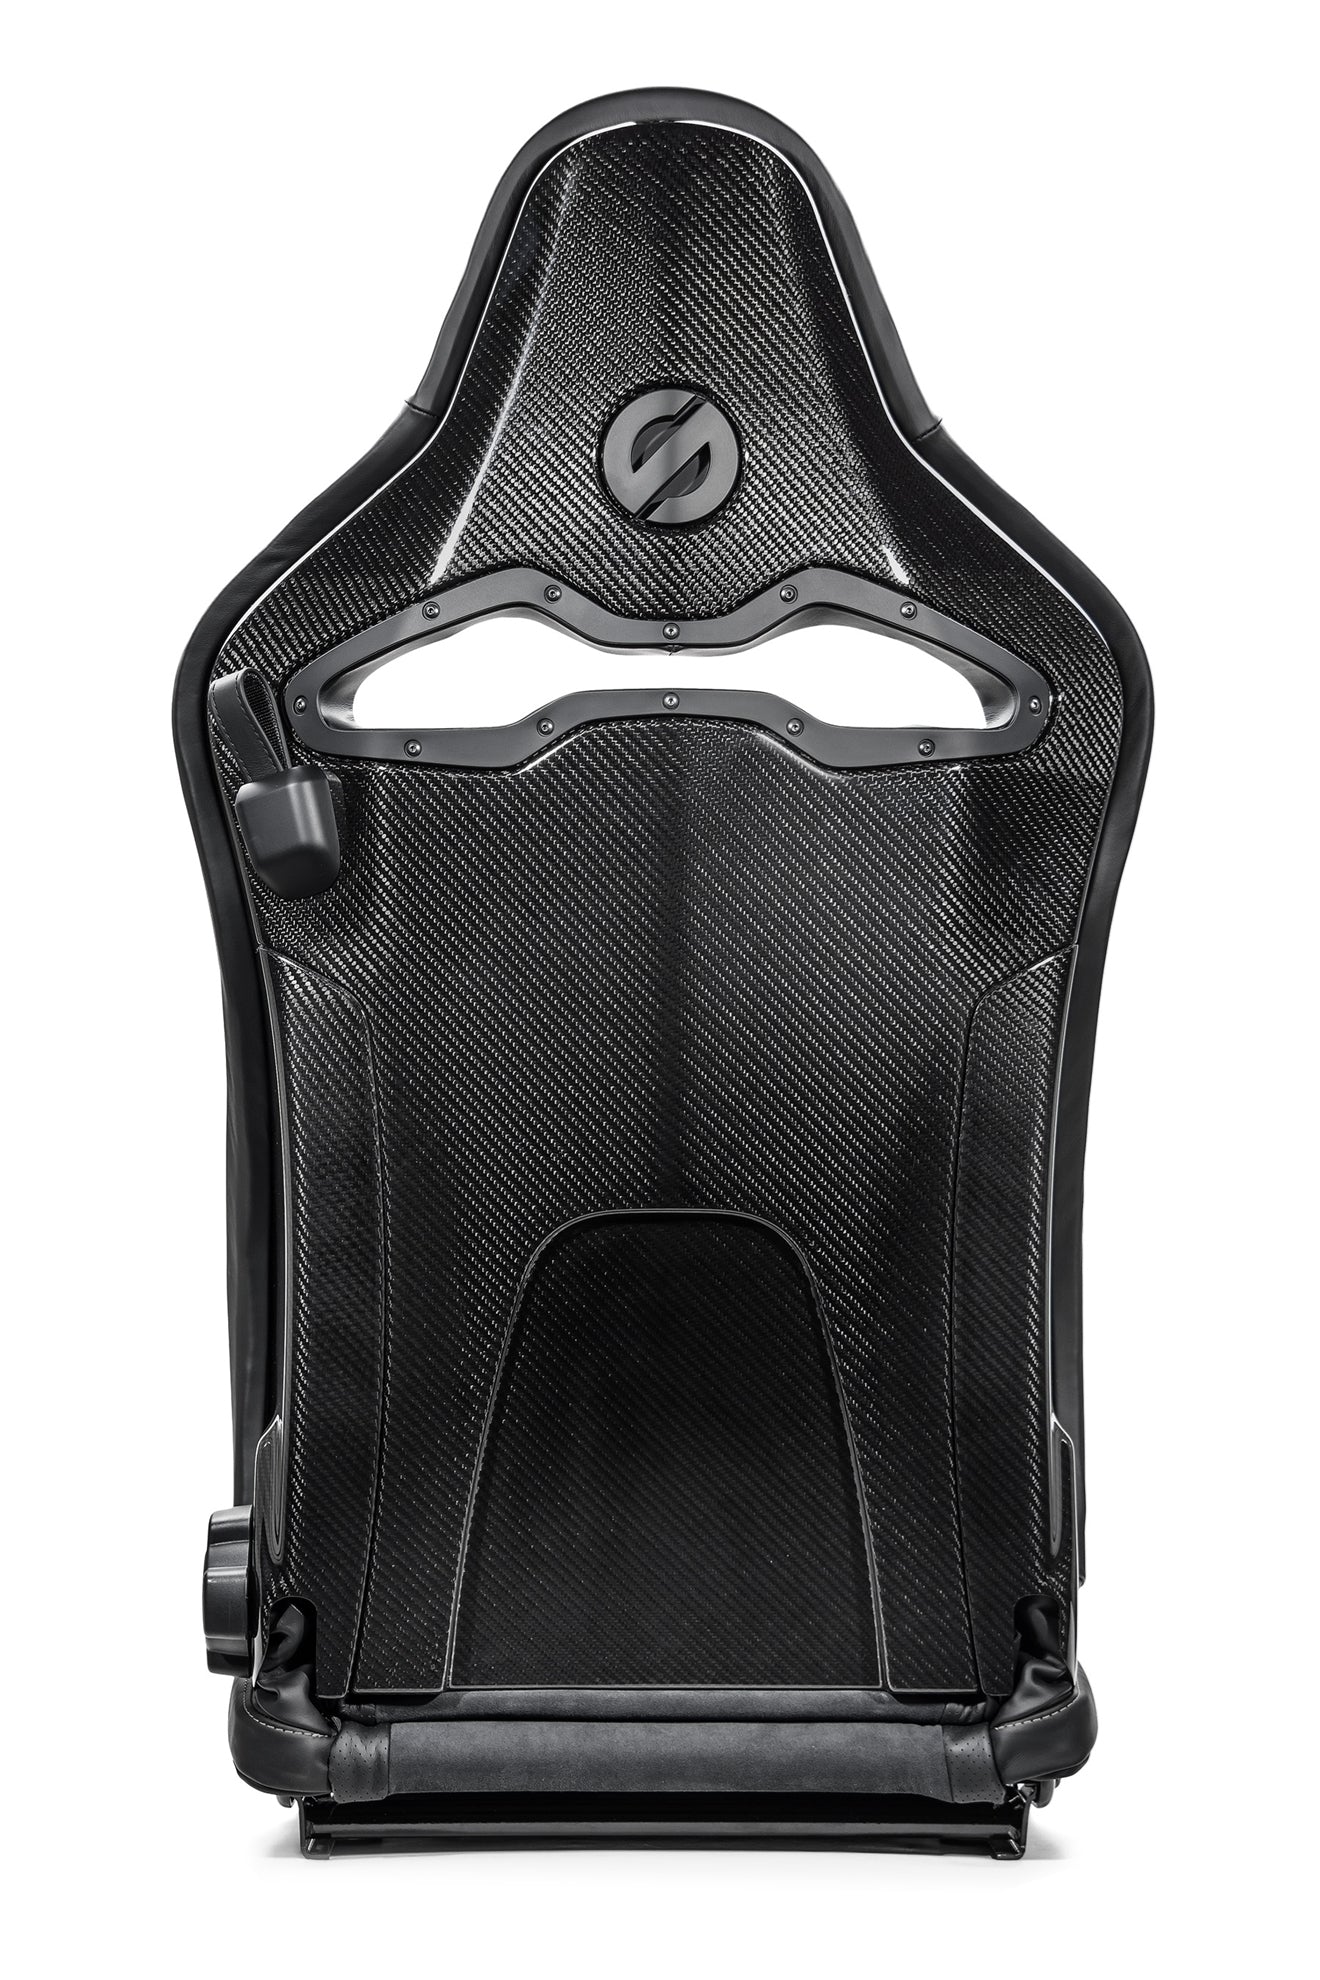 Sparco SPX Special Edition Street Seat